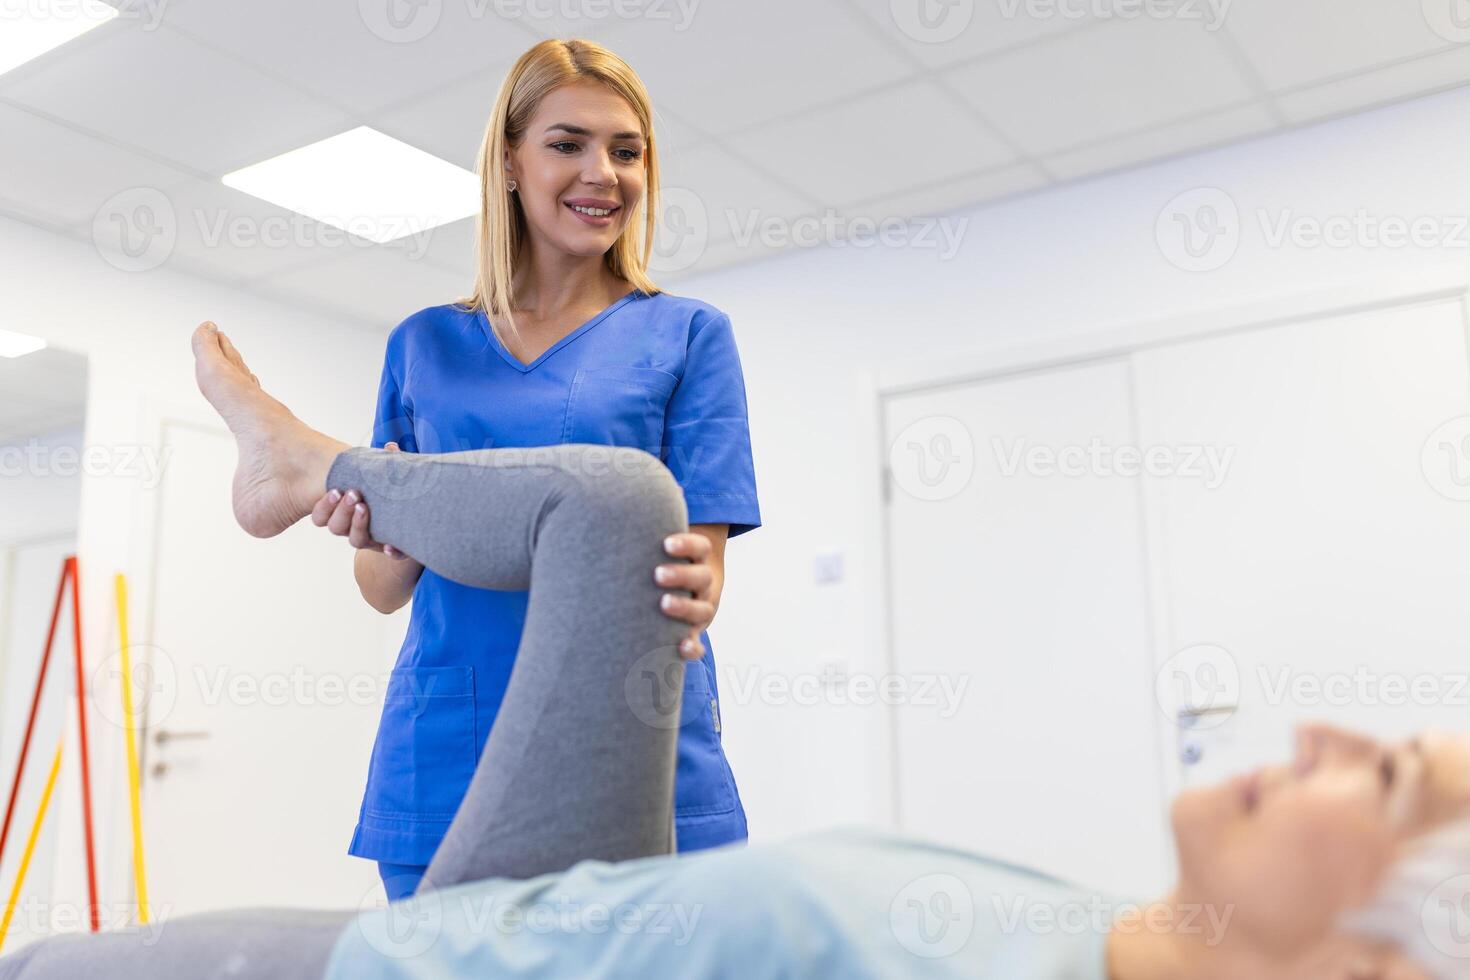 Physiotherapist working with patient in clinic, closeup. A Modern rehabilitation physiotherapy worker with senior client, Physical therapist stretching patient knee photo